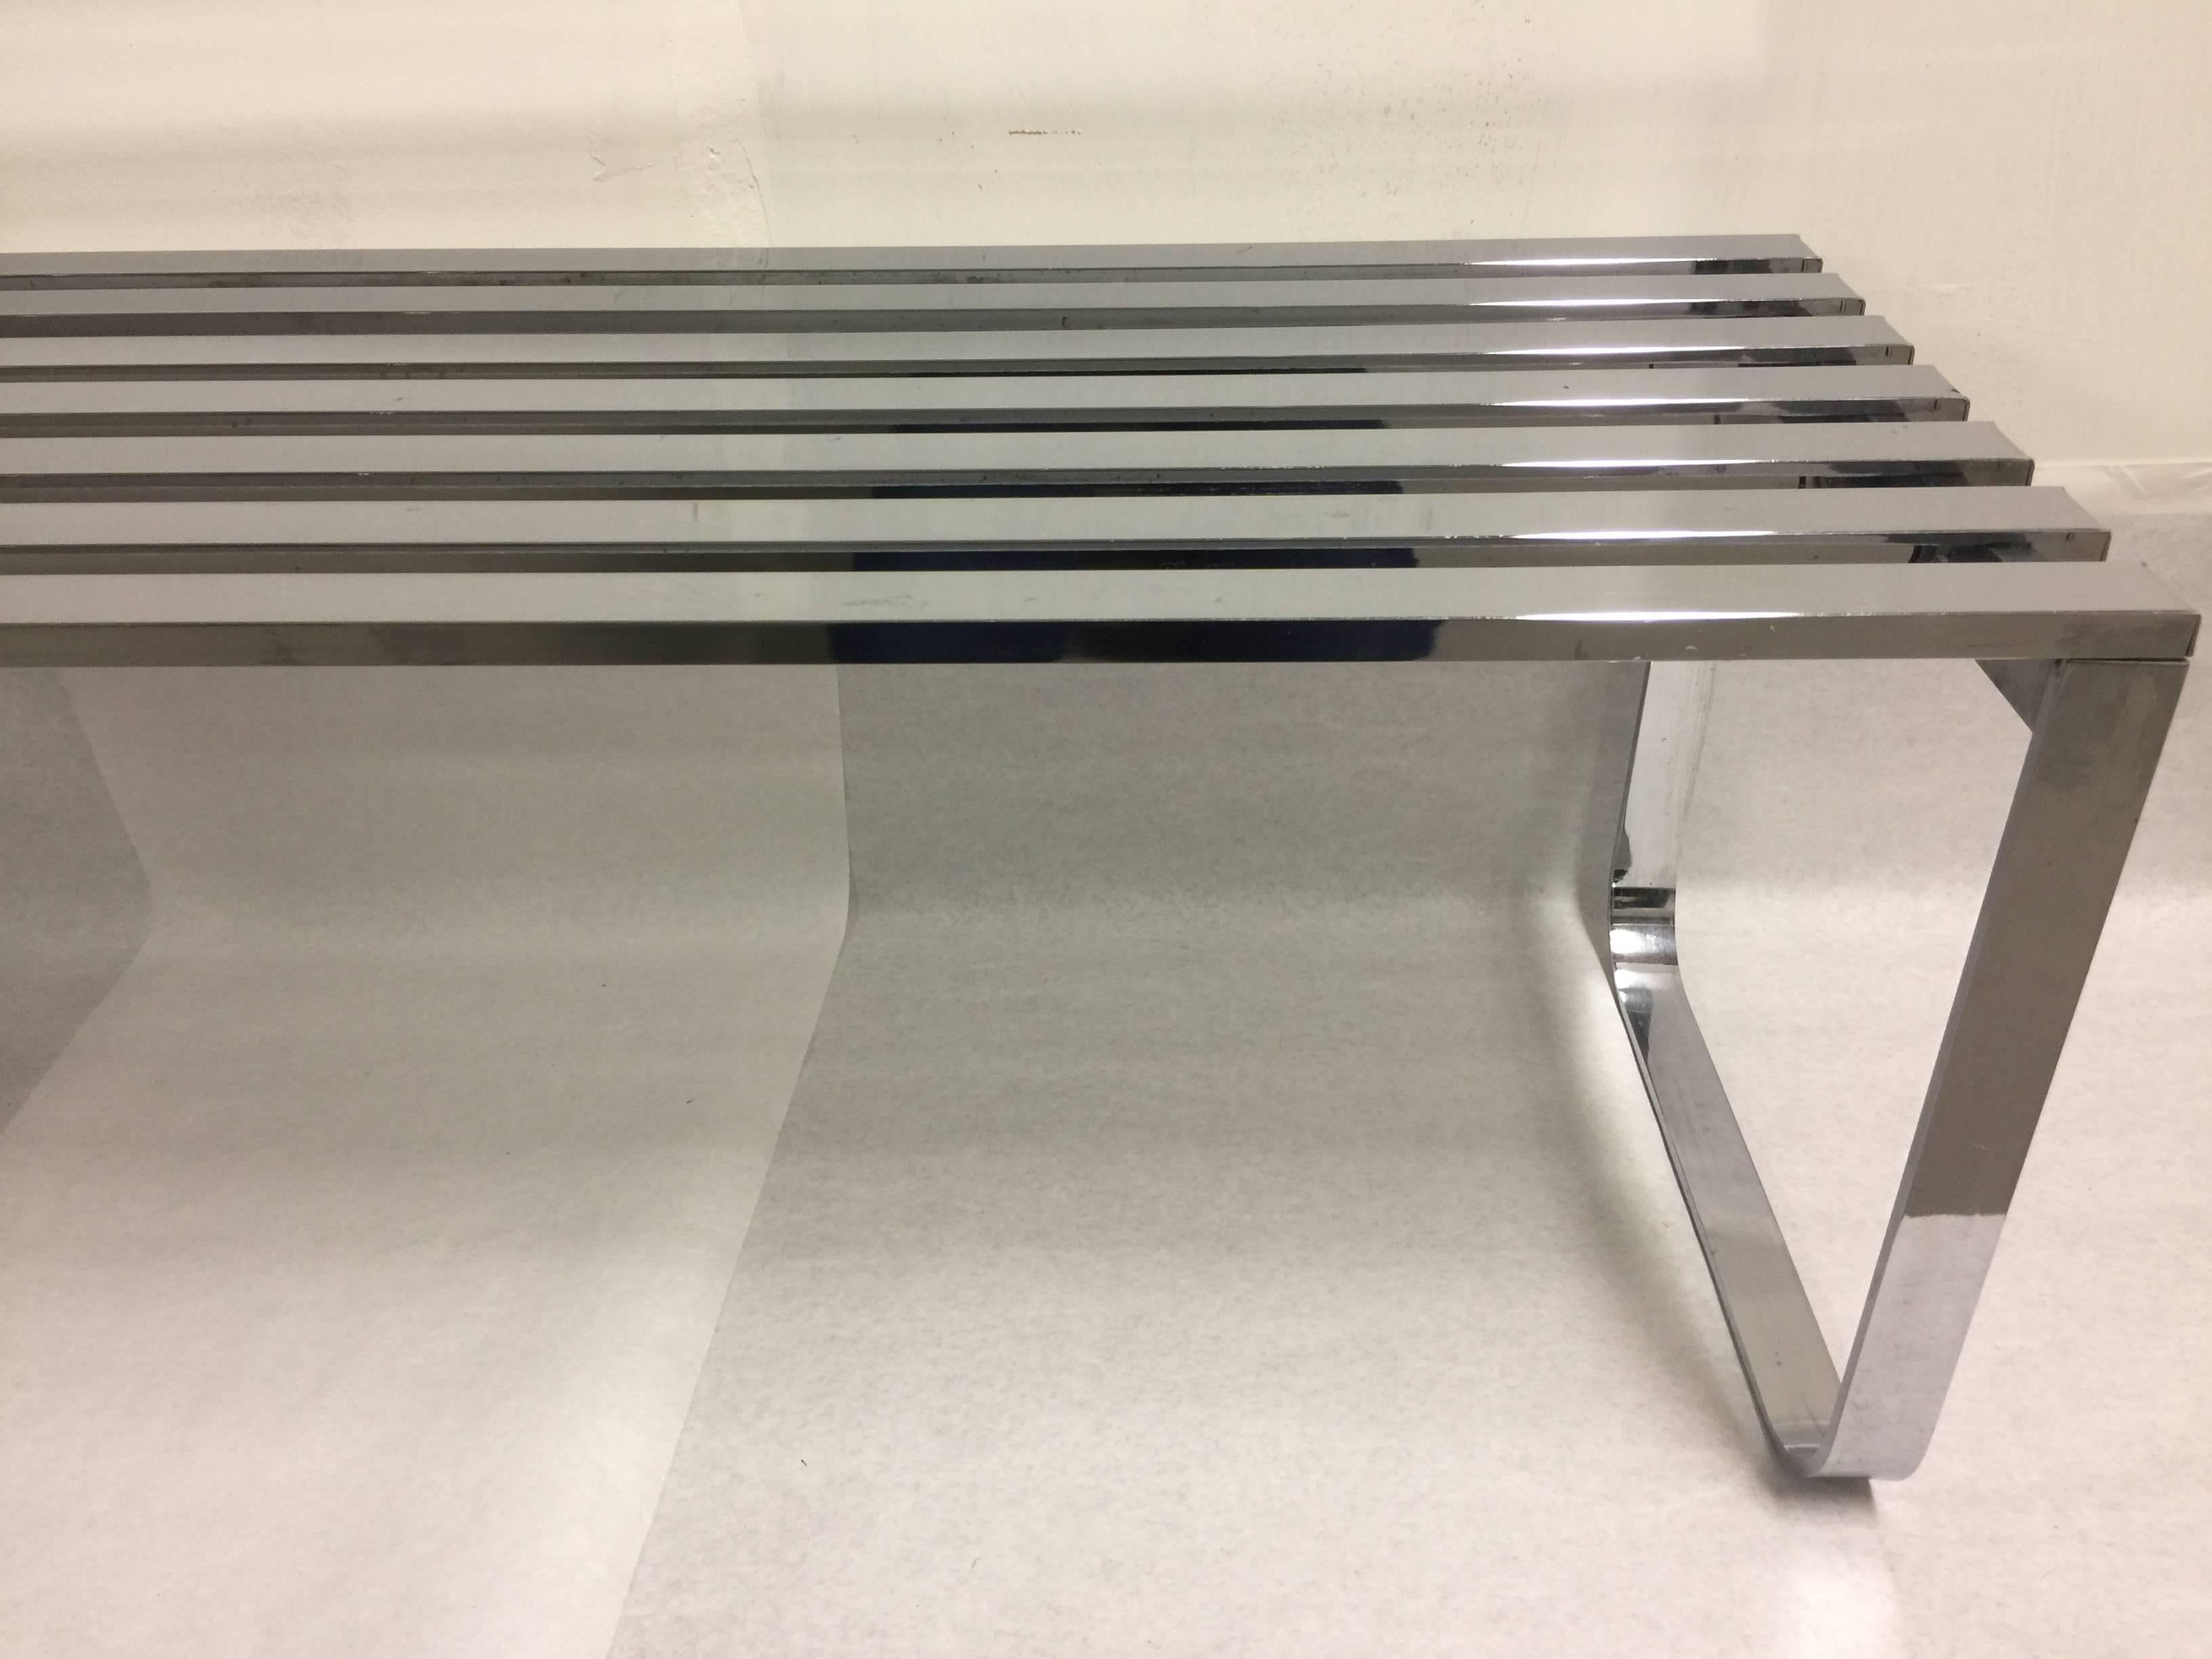 American Vintage circa 1970s Milo Baughman for DIA Chrome-Plated Slat Bench or Table